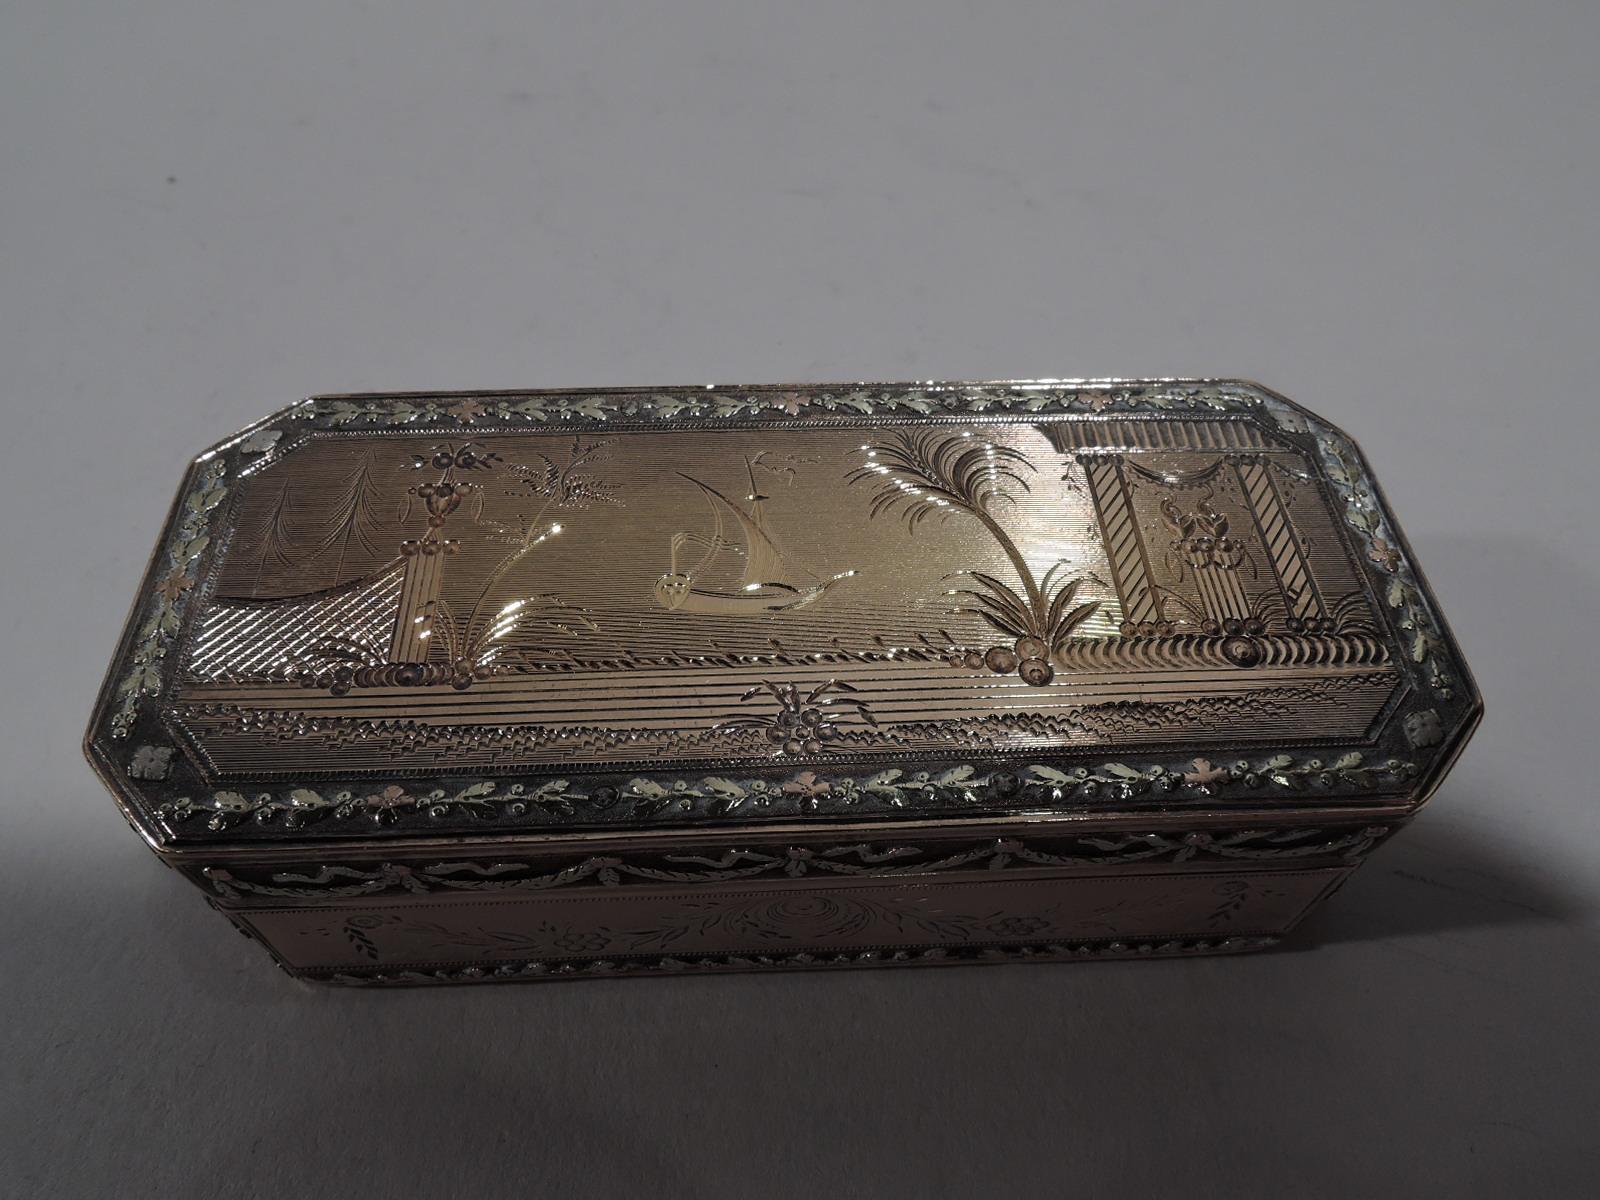 Elegant French Neoclassical 18k gold snuffbox, 19th century. Rectangular with chamfered corners. Cover flat and hinged. Bright-cut ornament engraved on pink ground. On cover Classical architecture and sailboat. On bottom an amphora vase with flowers